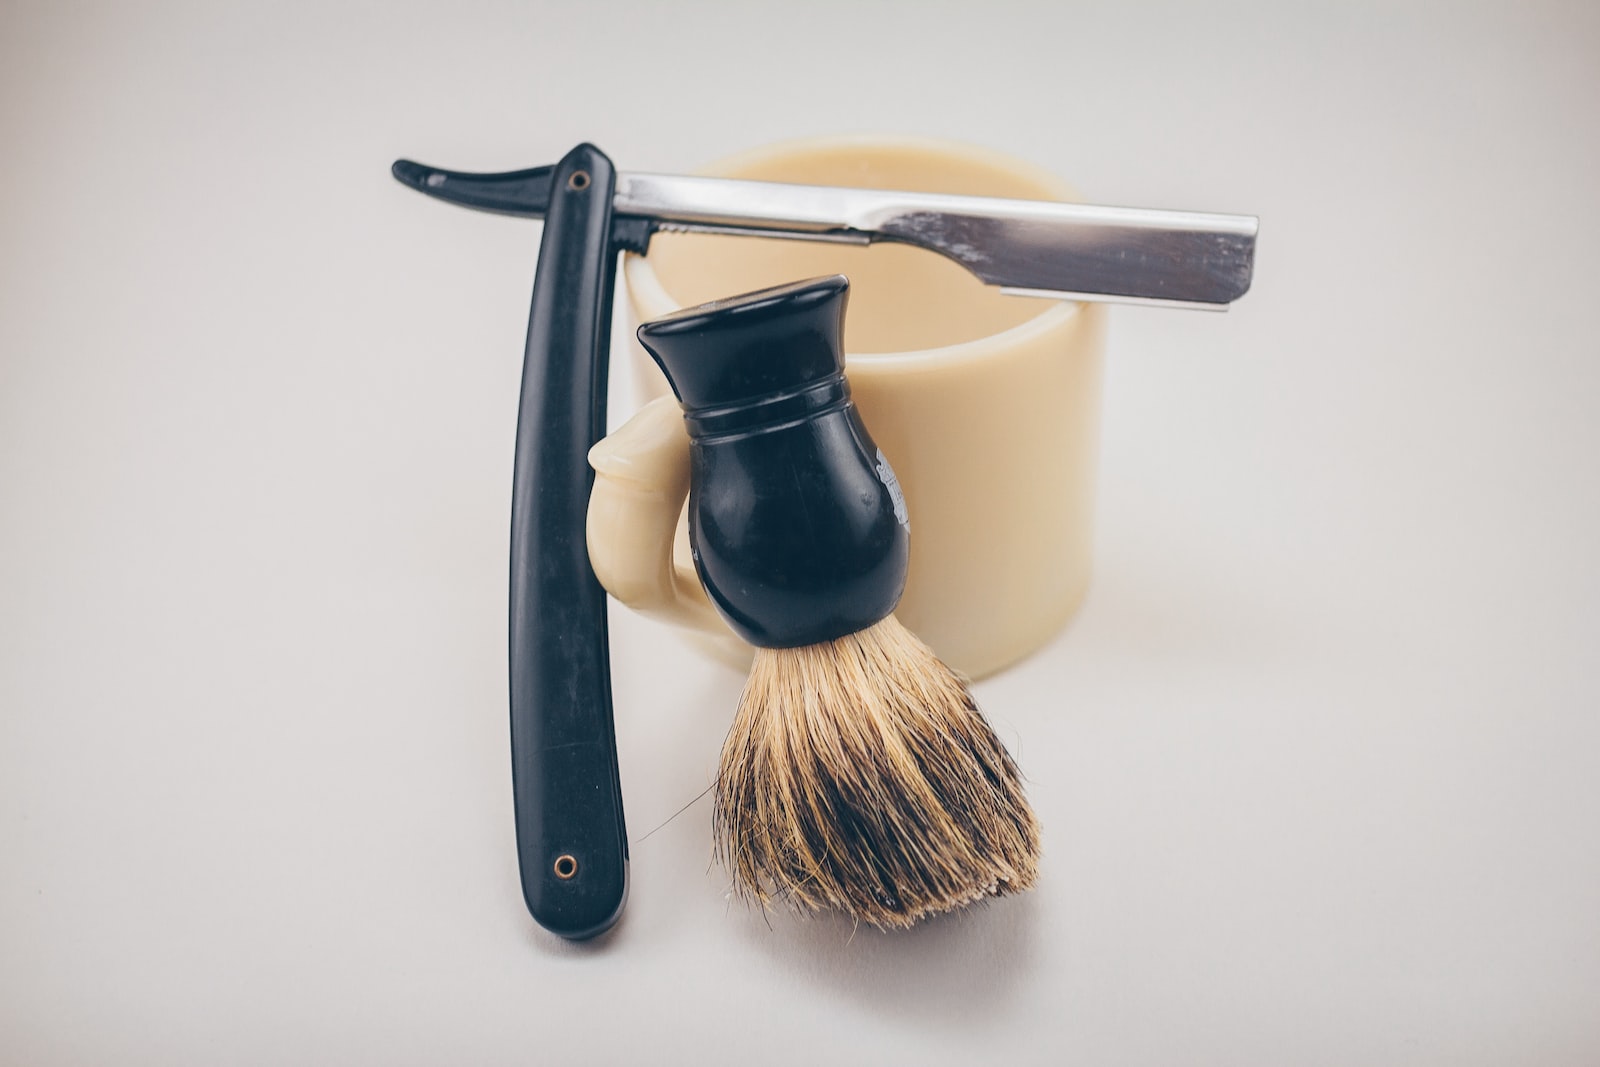 How to Clean a Beard Brush